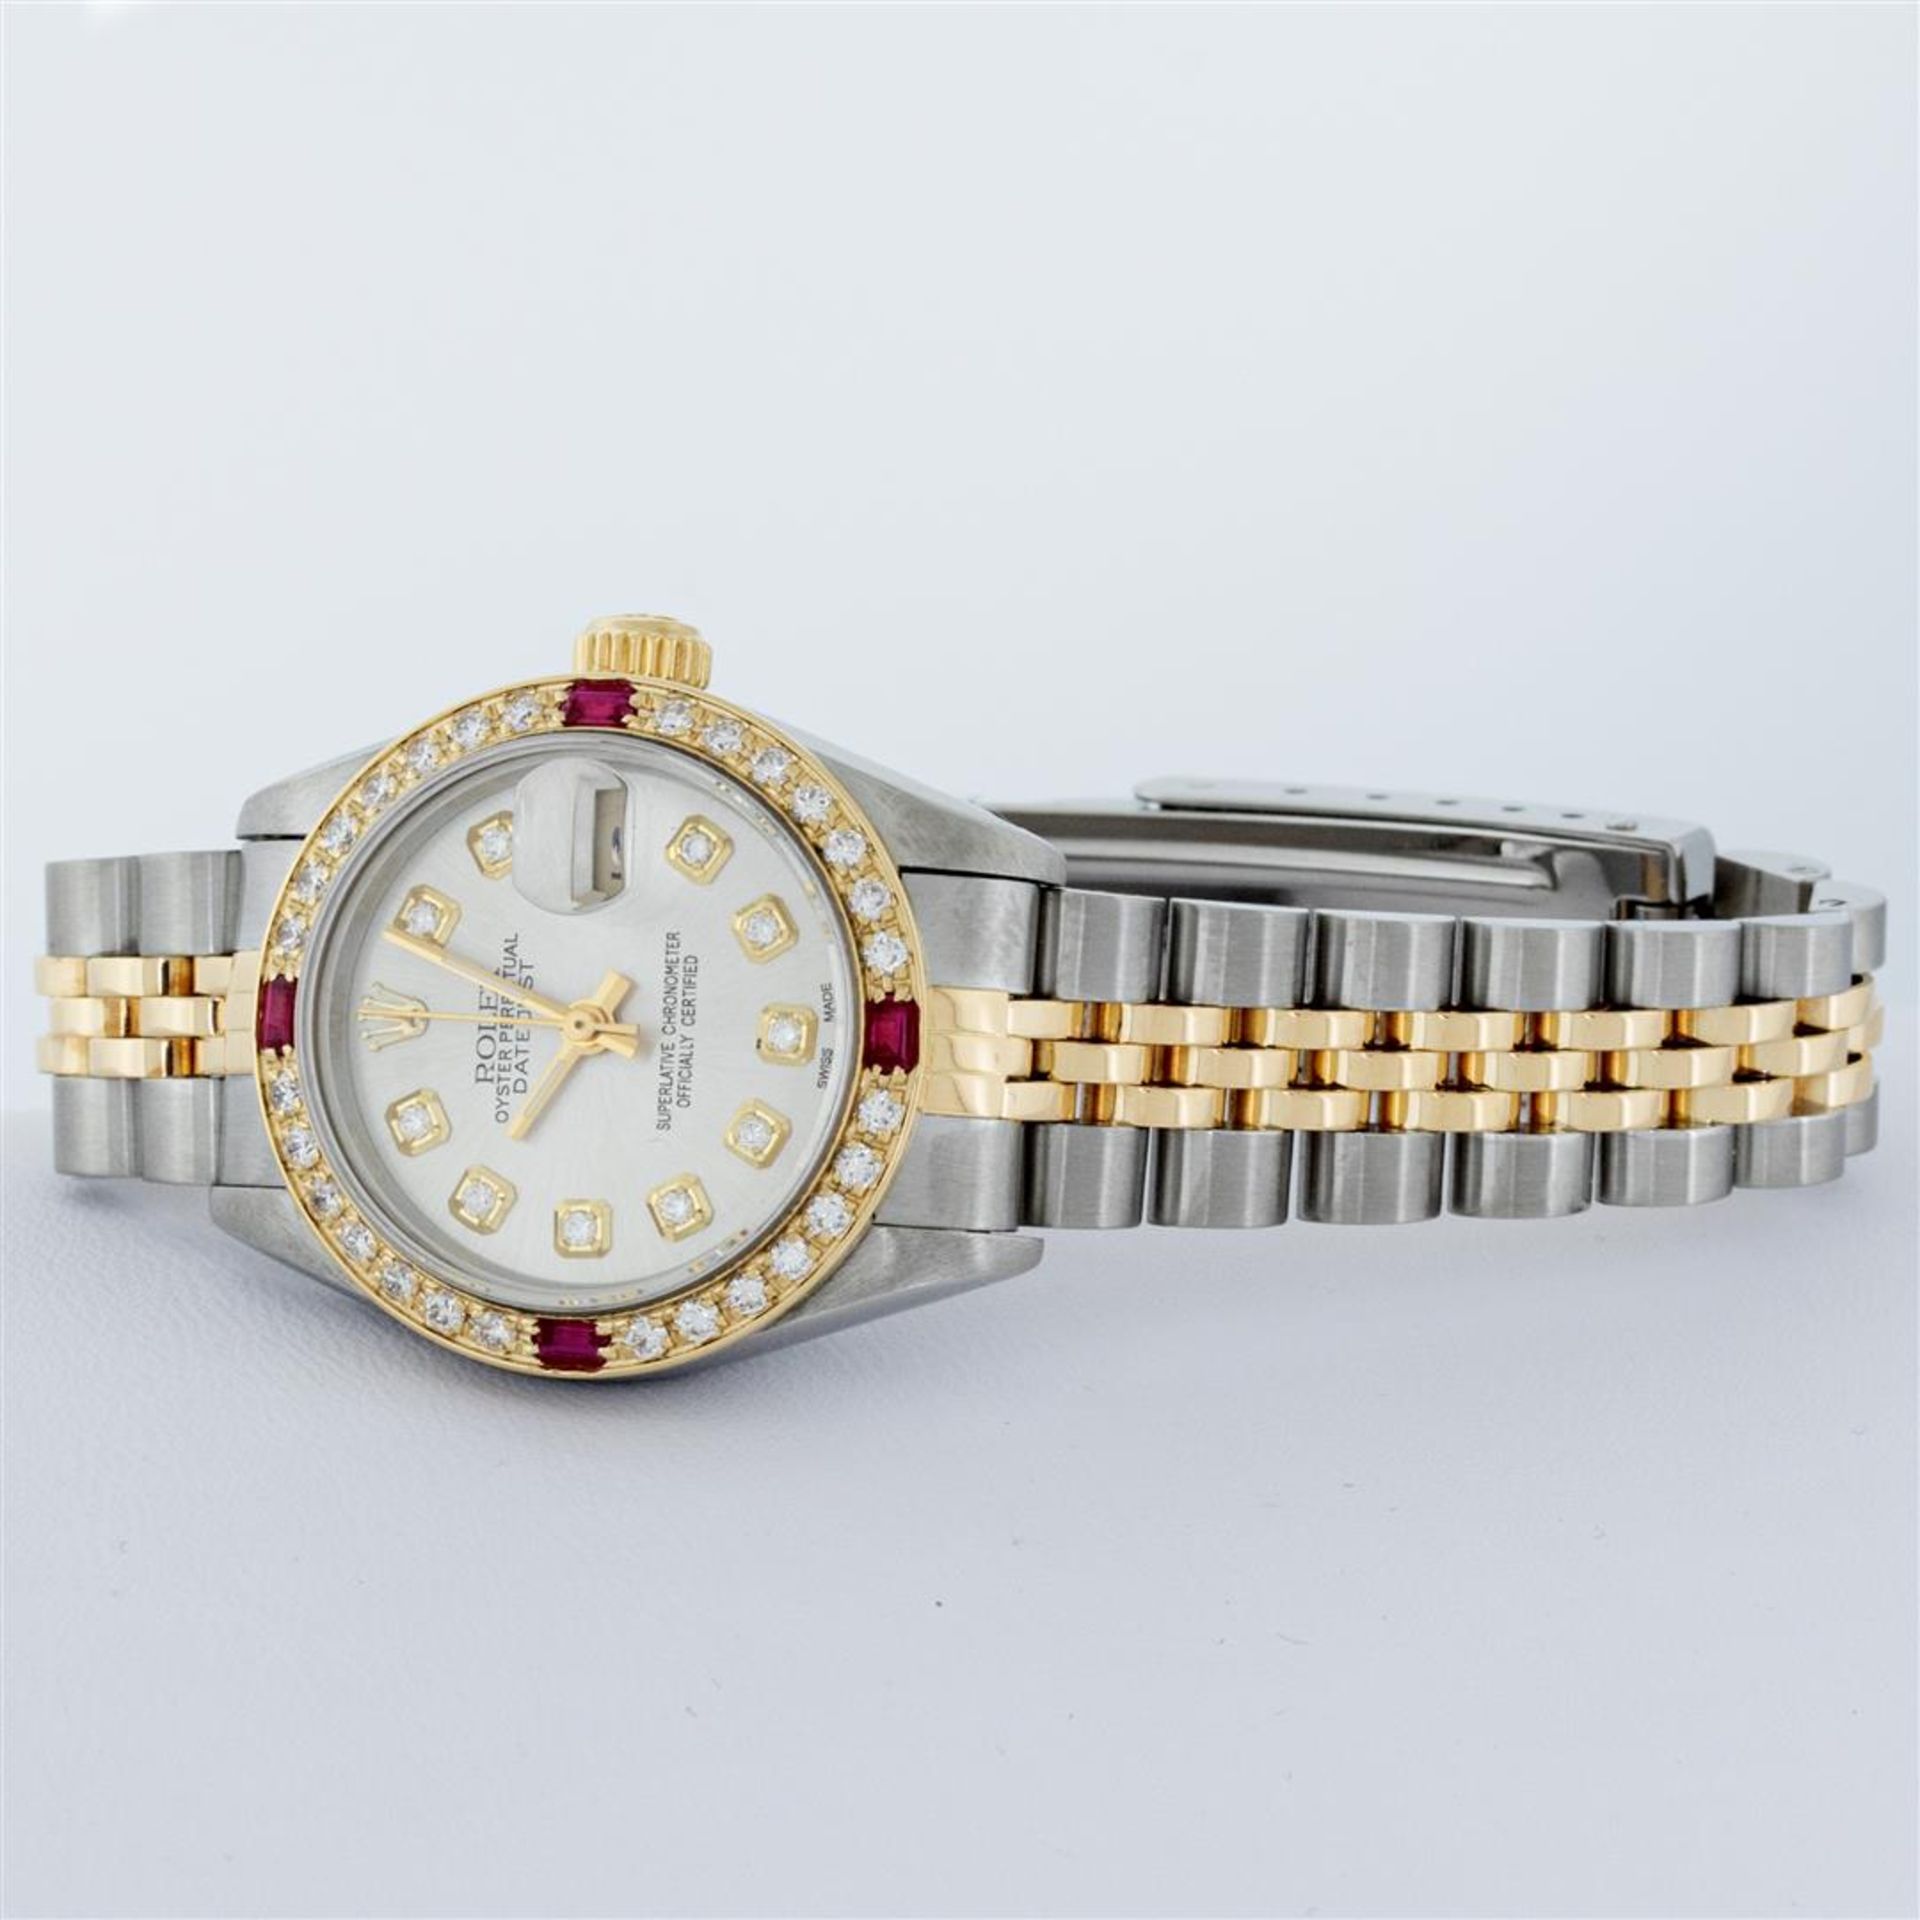 Rolex Ladies 2 Tone Silver Diamond & Ruby Oyster Perpetual Datejust Wristwatch - Image 9 of 9